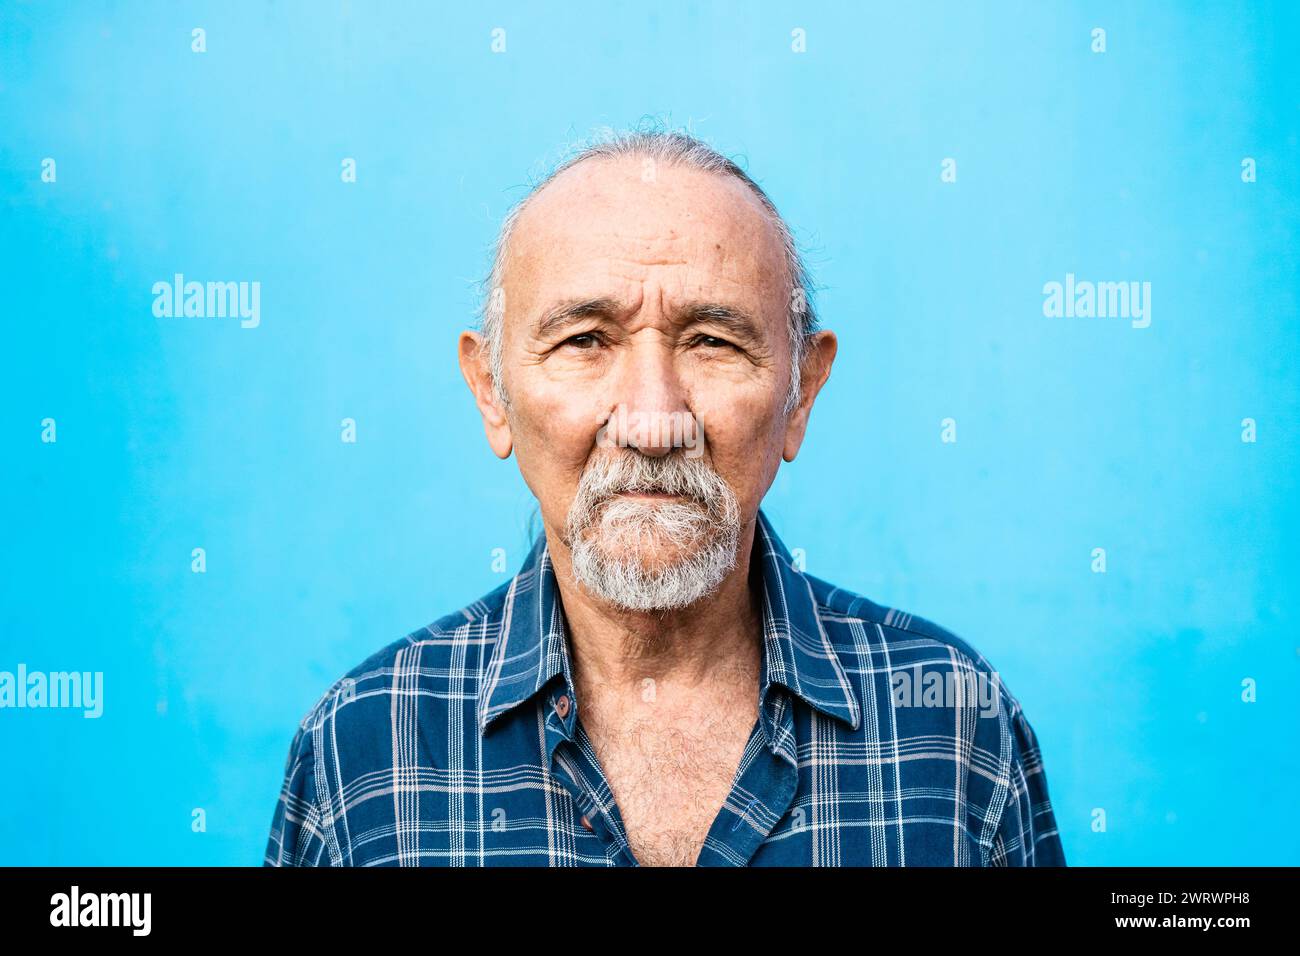 Portrait of a Senior man looking into the camera - Elderly people lifestyle concept Stock Photo